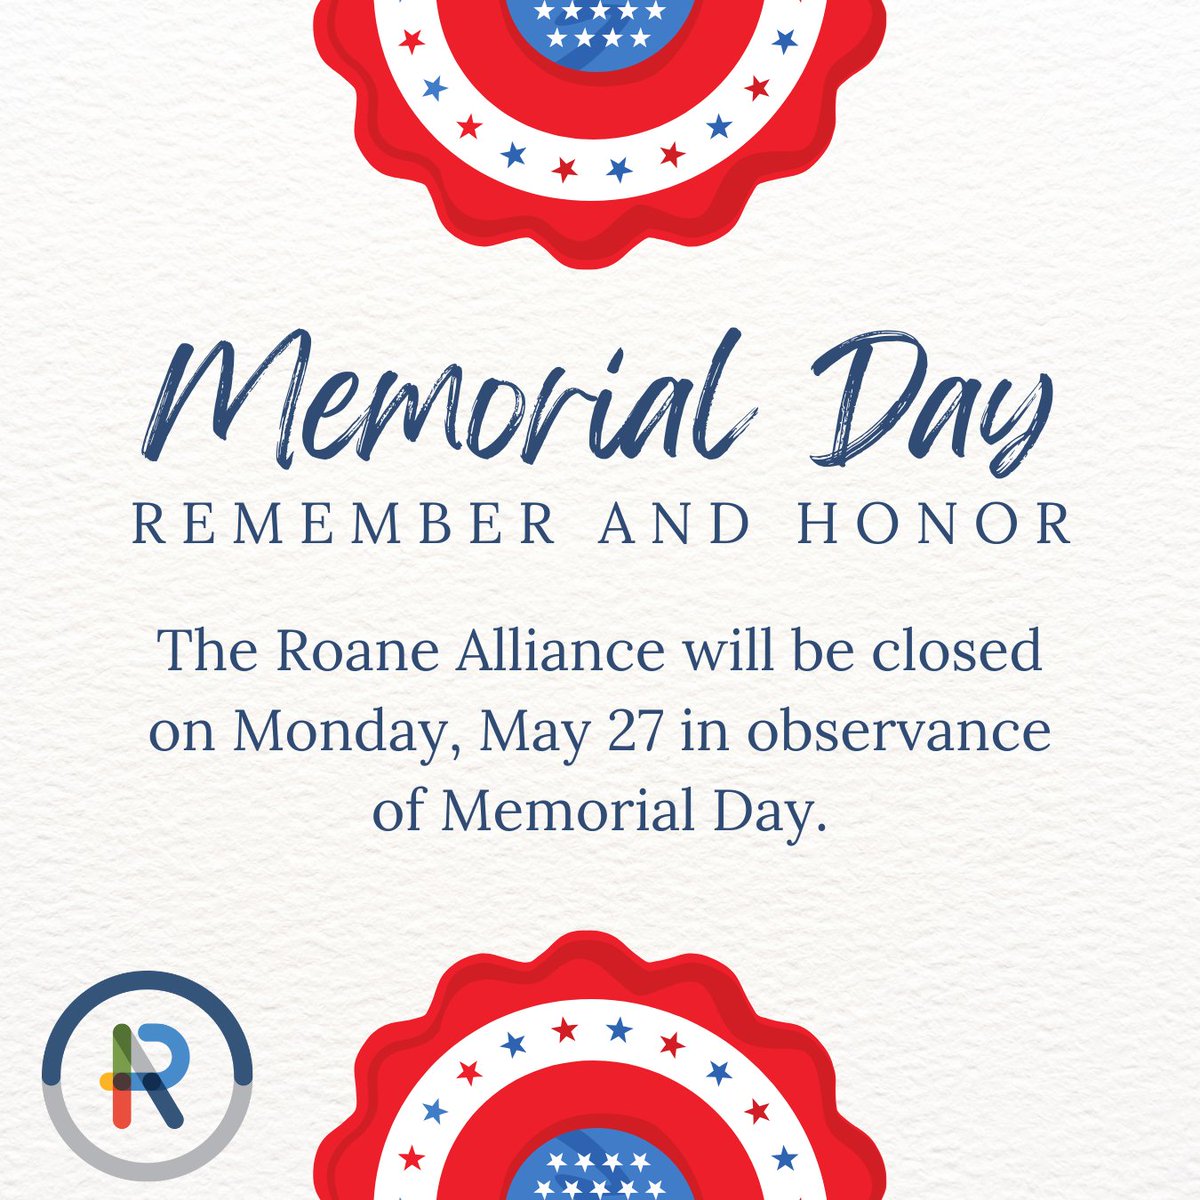 The #RoaneAlliance will be closed on Memorial Day, May 27th, to honor and remember those who served. We will reopen on May 28th. 🇺🇸 #roanechamber